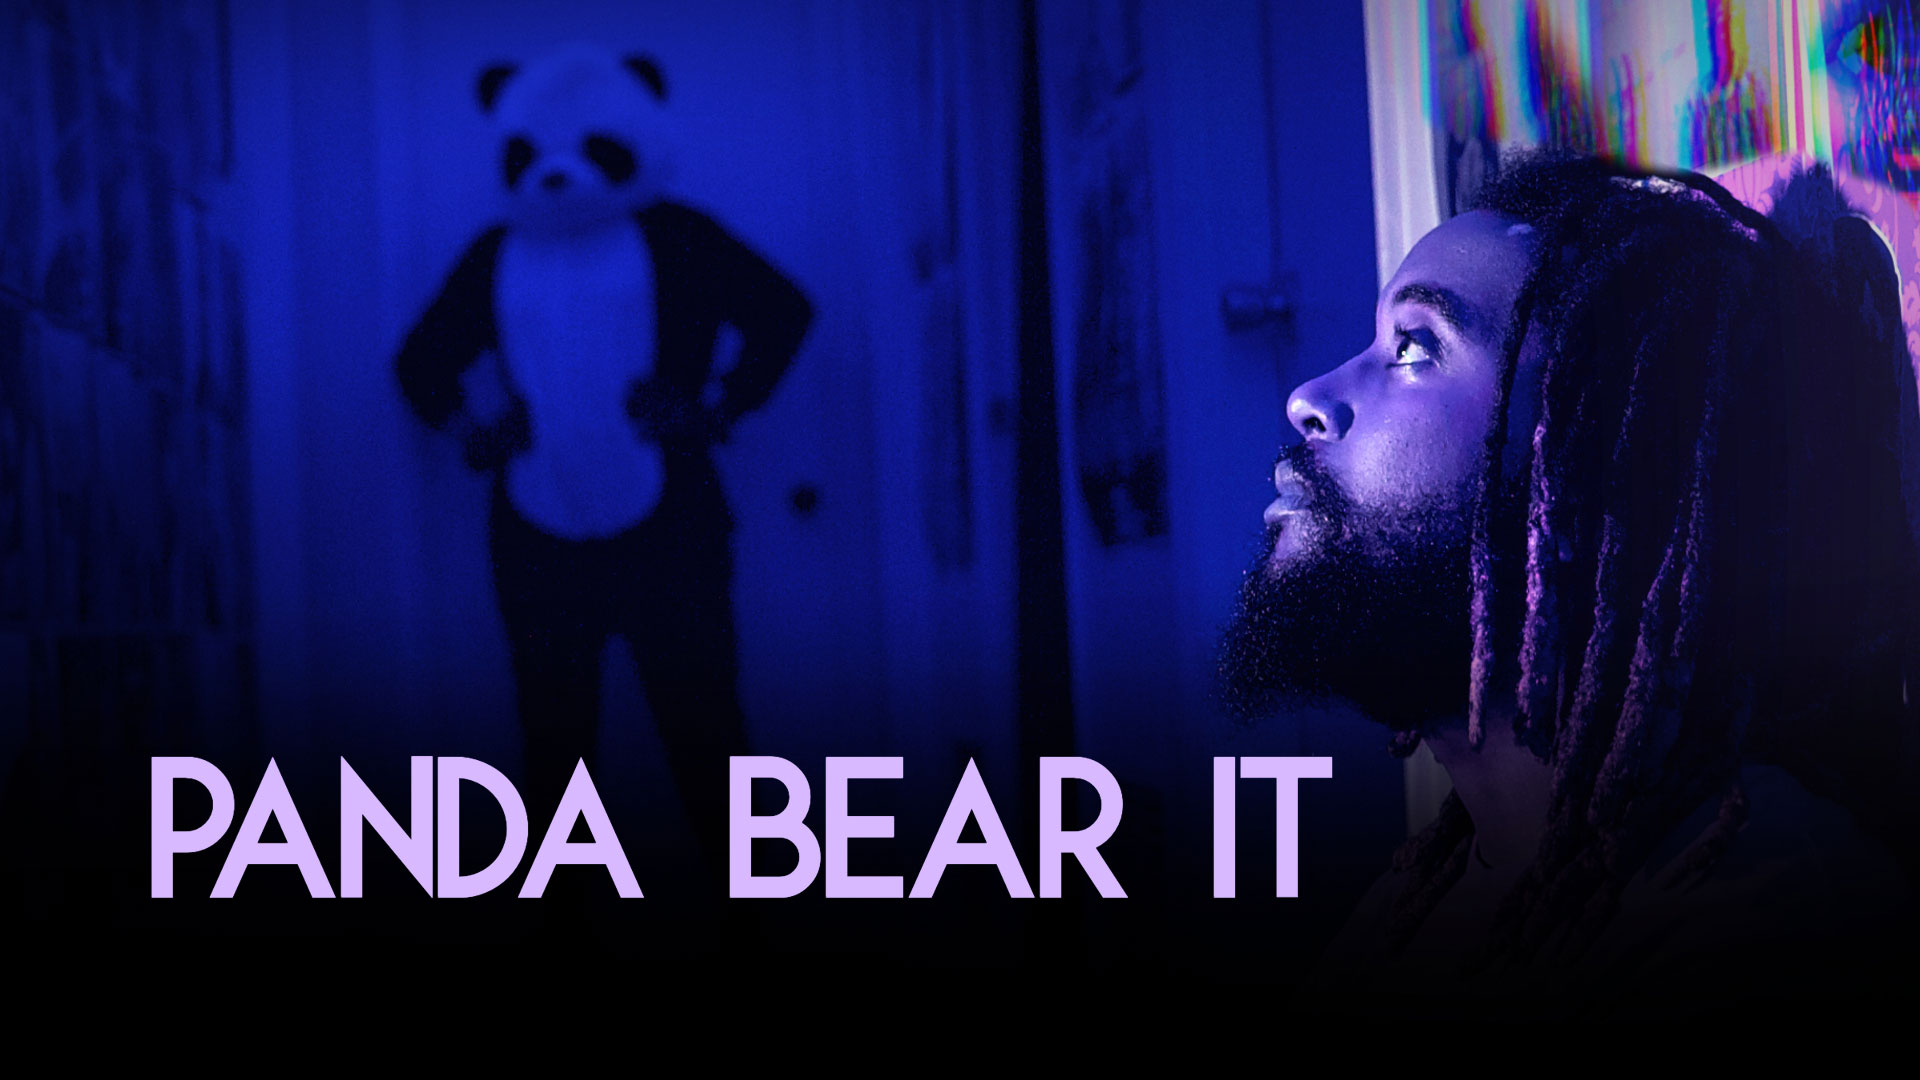 Panda Bear It – Evan Kidd Delivers a Surreal Slice of Life in his Latest Film - banner image